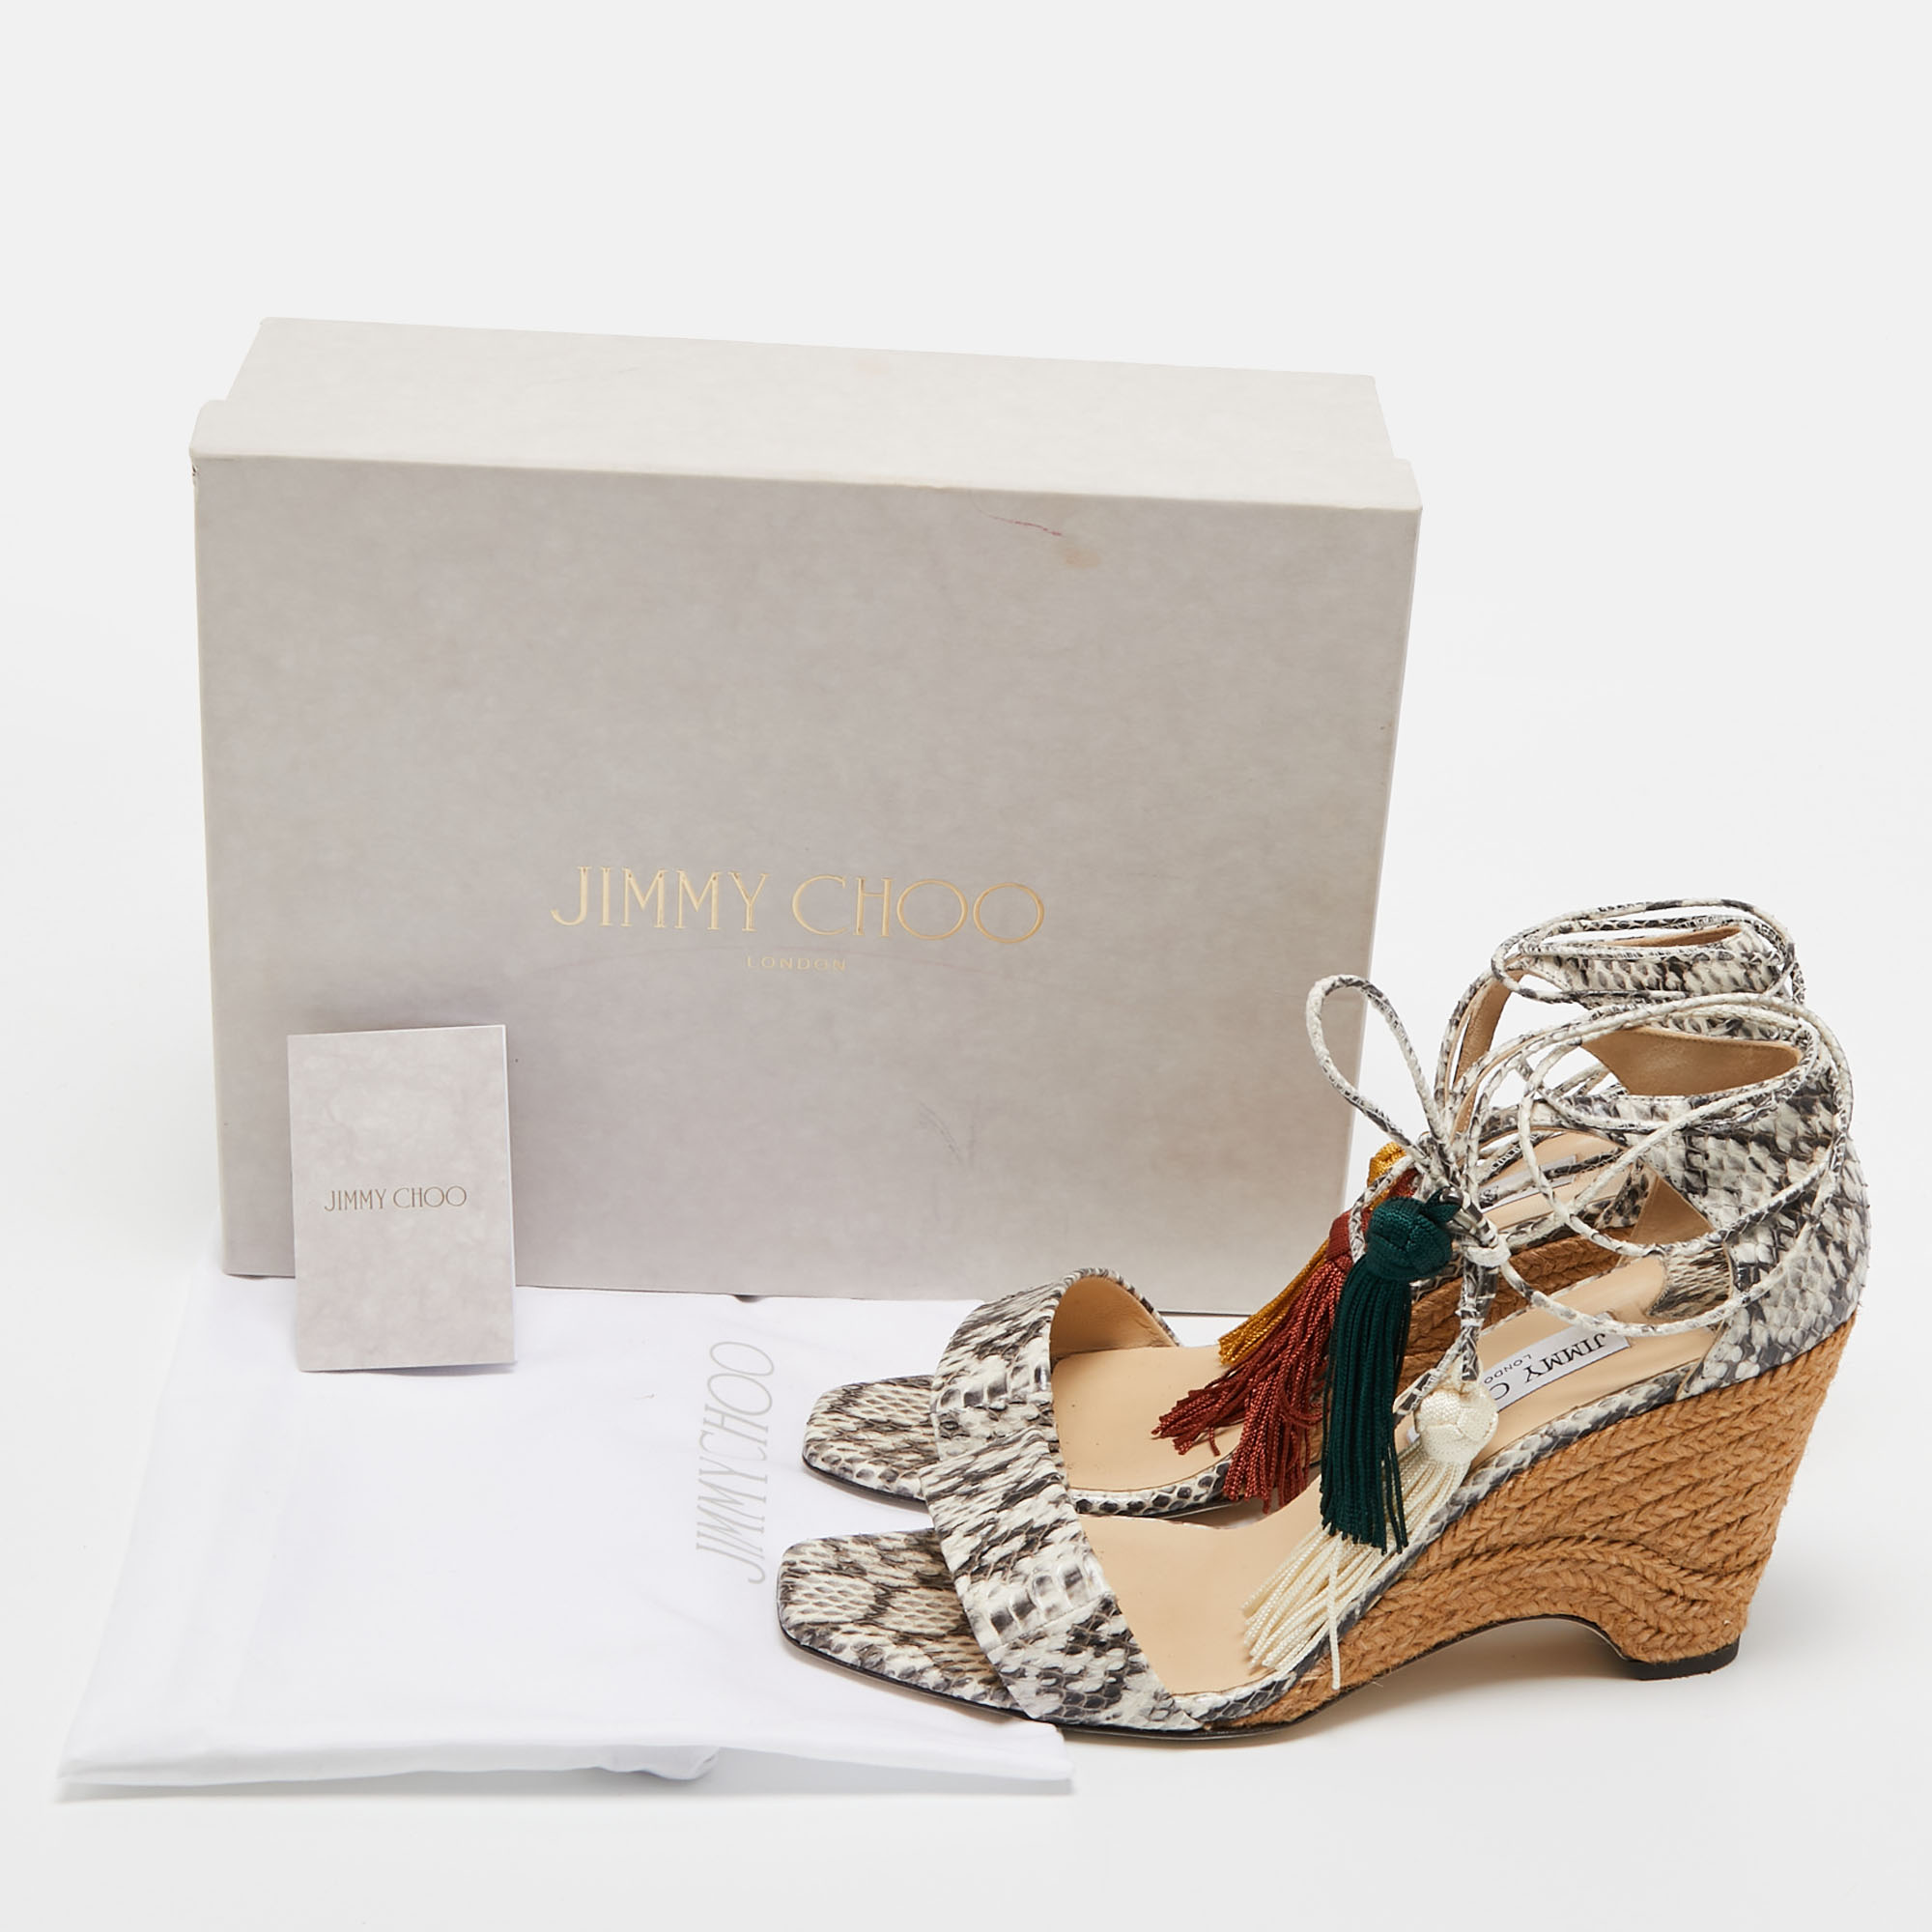 Jimmy Choo Brown/Cream Python Leather Wedge Sandals Size 40.5